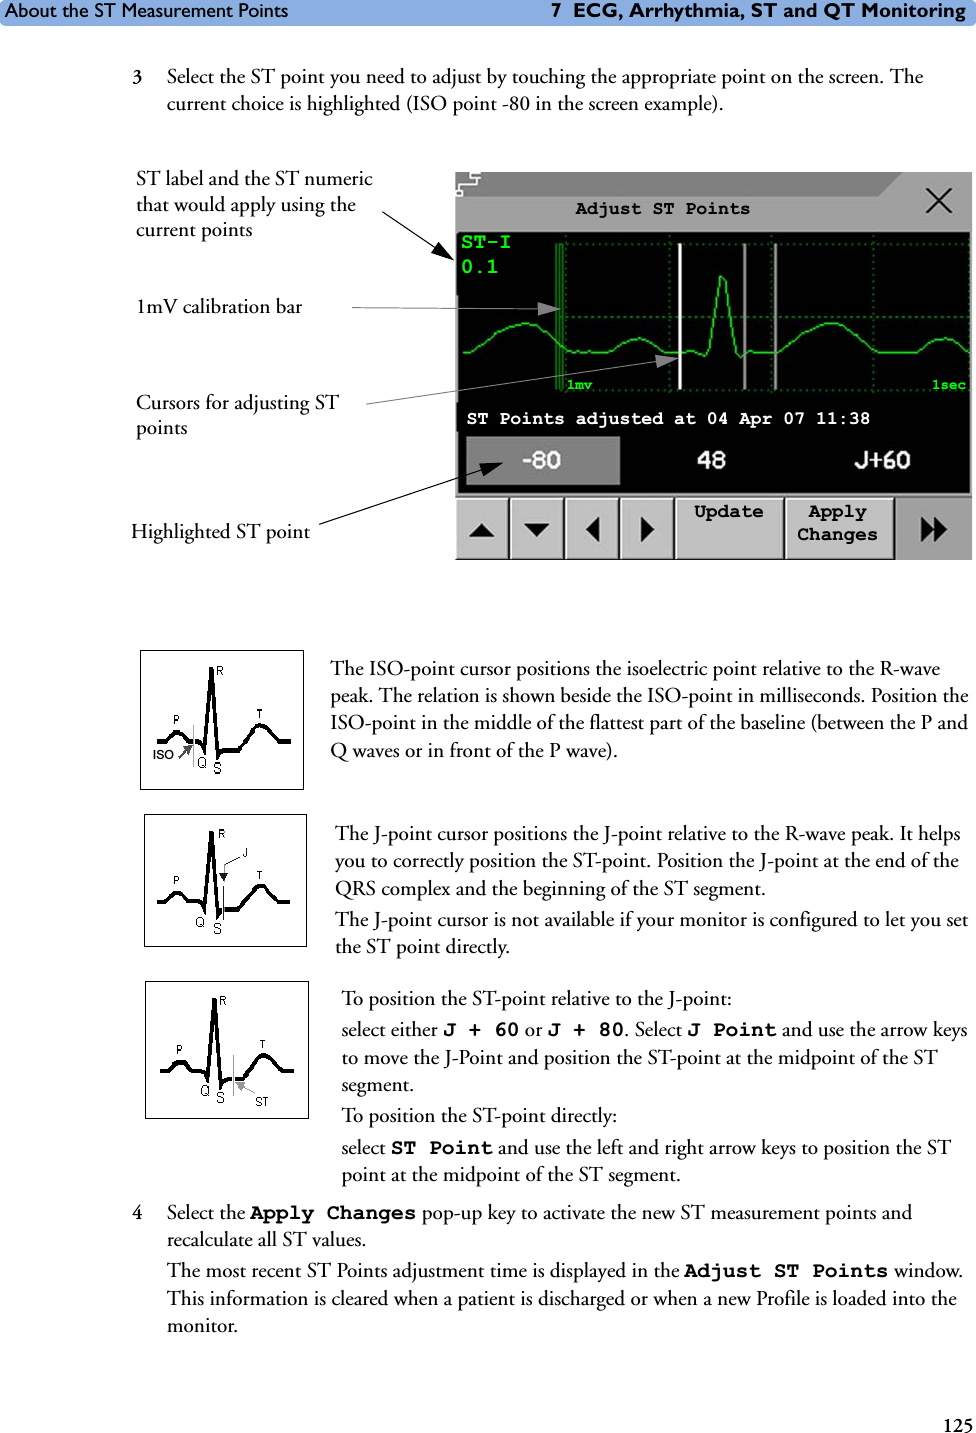 About the ST Measurement Points 7 ECG, Arrhythmia, ST and QT Monitoring1253Select the ST point you need to adjust by touching the appropriate point on the screen. The current choice is highlighted (ISO point -80 in the screen example).The ISO-point cursor positions the isoelectric point relative to the R-wave peak. The relation is shown beside the ISO-point in milliseconds. Position the ISO-point in the middle of the flattest part of the baseline (between the P and Q waves or in front of the P wave). The J-point cursor positions the J-point relative to the R-wave peak. It helps you to correctly position the ST-point. Position the J-point at the end of the QRS complex and the beginning of the ST segment. The J-point cursor is not available if your monitor is configured to let you set the ST point directly. To position the ST-point relative to the J-point:select either J+60 or J+80. Select J Point and use the arrow keys to move the J-Point and position the ST-point at the midpoint of the ST segment. To position the ST-point directly: select ST Point and use the left and right arrow keys to position the ST point at the midpoint of the ST segment.4Select the Apply Changes pop-up key to activate the new ST measurement points and recalculate all ST values.The most recent ST Points adjustment time is displayed in the Adjust ST Points window. This information is cleared when a patient is discharged or when a new Profile is loaded into the monitor. 1mV calibration barHighlighted ST pointST label and the ST numeric that would apply using the current pointsCursors for adjusting ST pointsAdjust ST PointsST-I0.1Update Apply Changes1mv 1secST Points adjusted at 04 Apr 07 11:38ISO